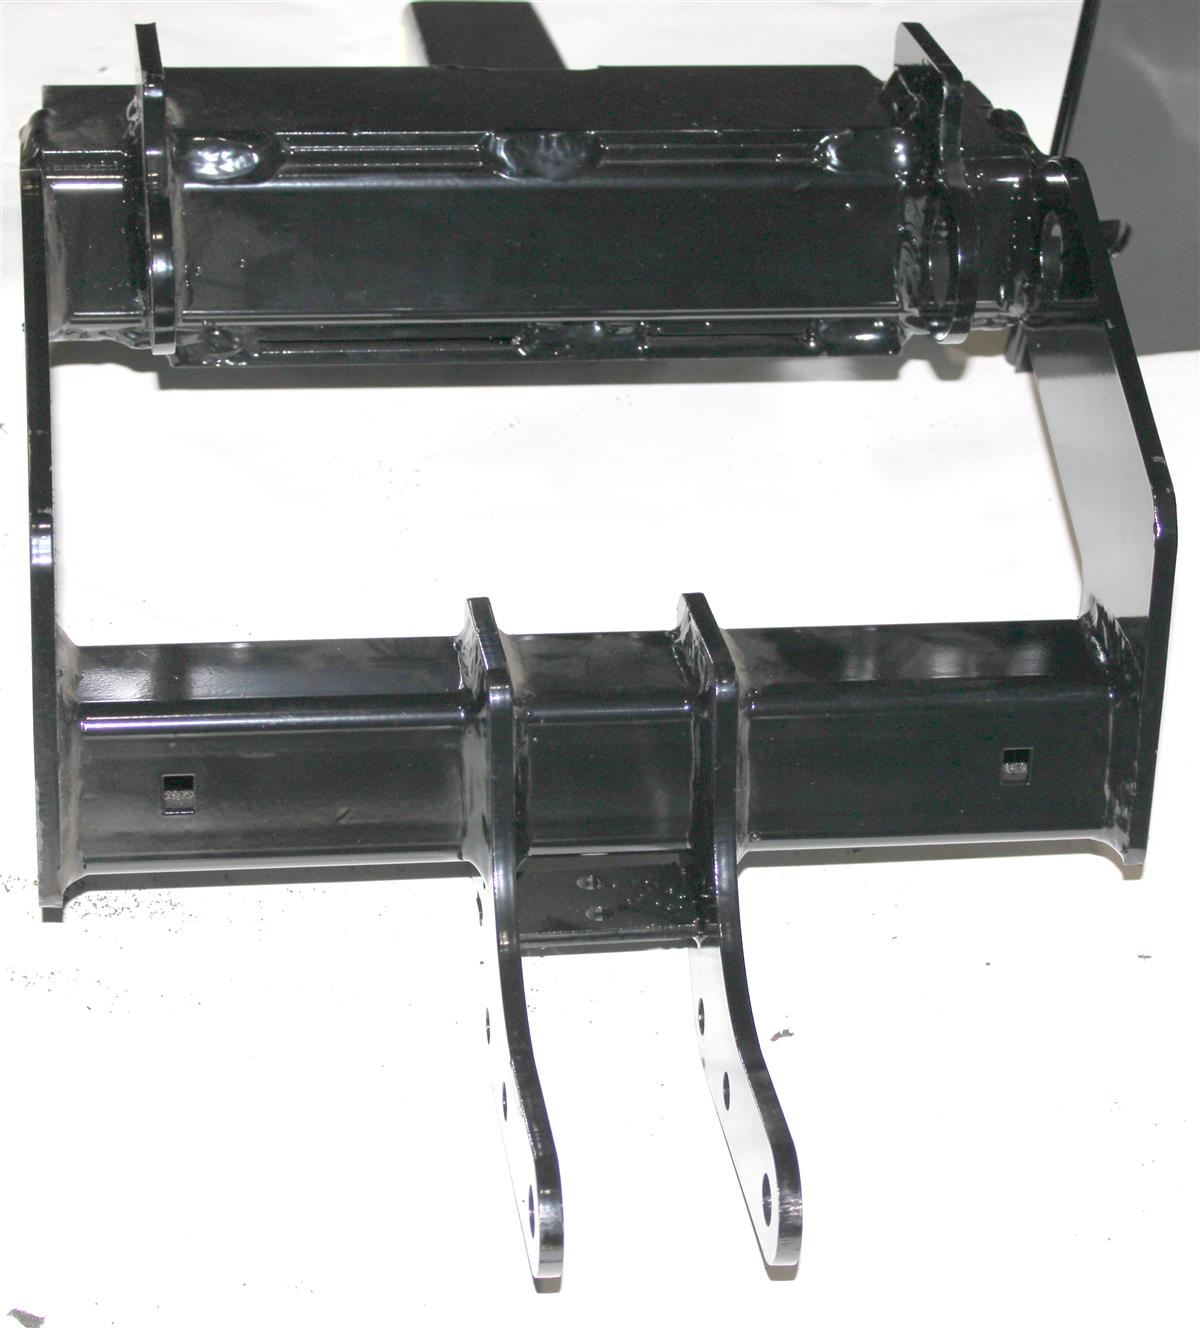 SNOW-068 | SNOW-068 Meyer Home Plow HP 6.8 2PC Manual Lift Engine Package Kit with Blades Meyer Sn (40).JPG